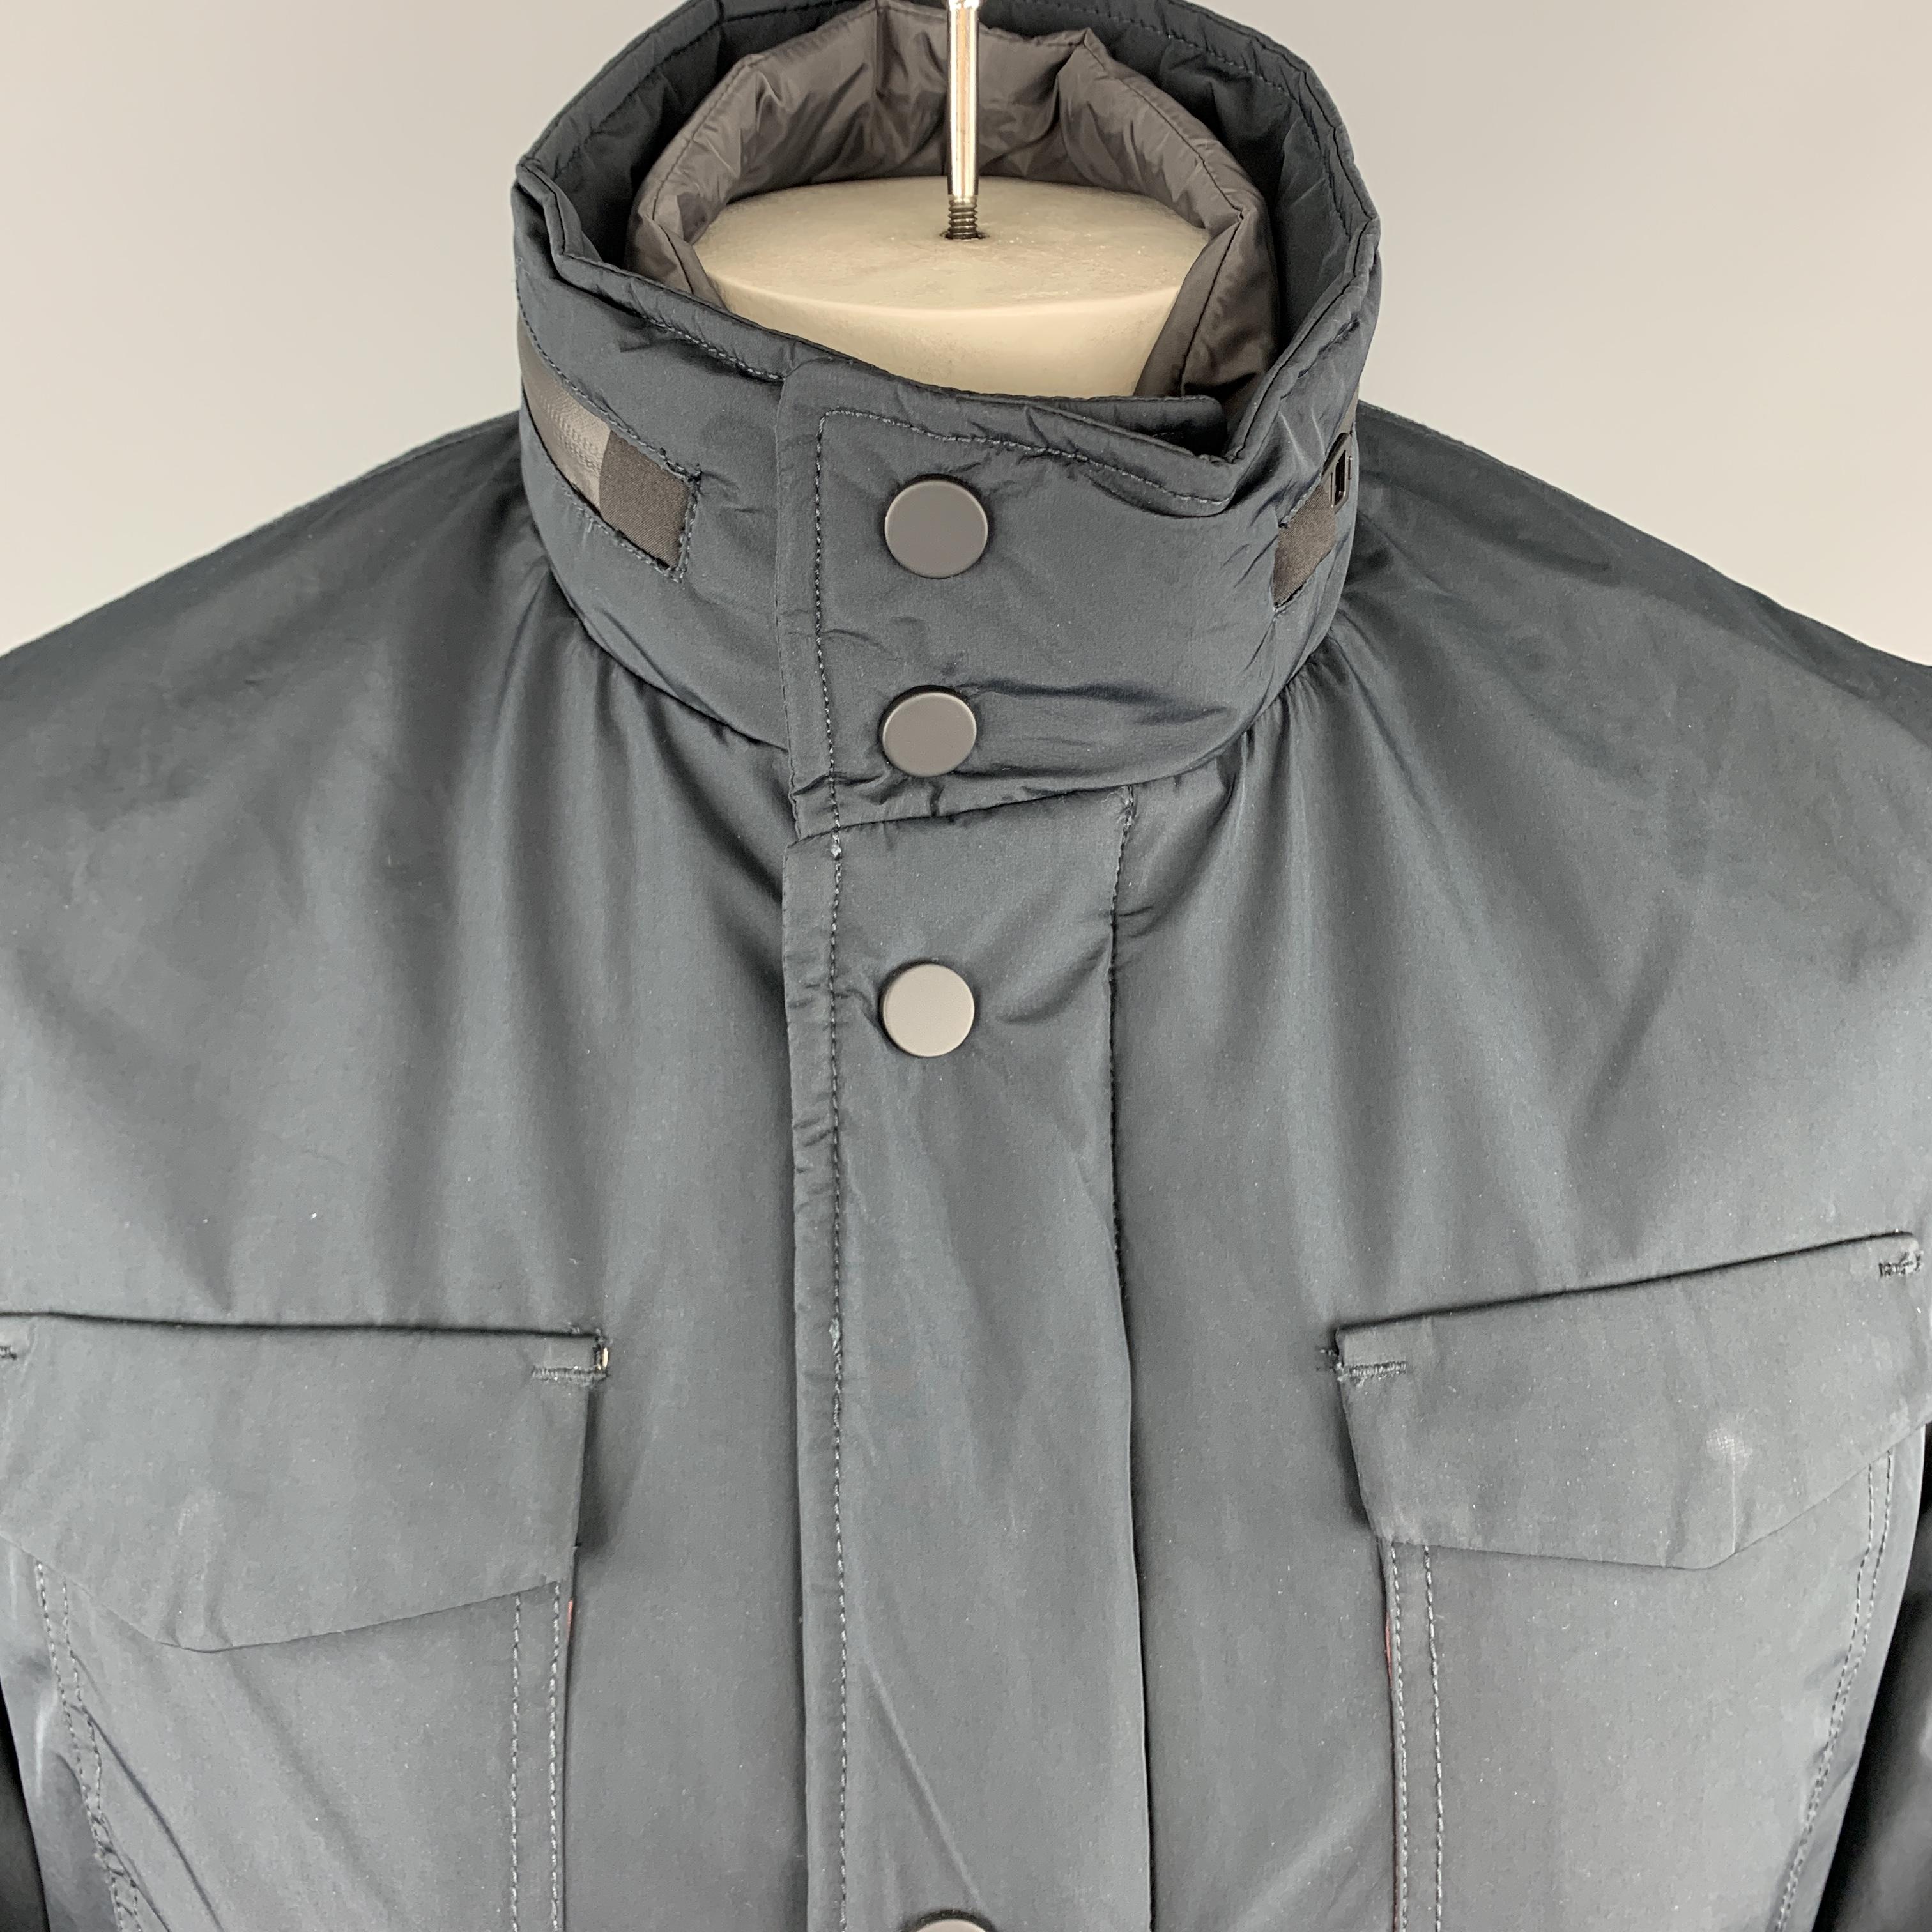 EREDI PISANO jacket comes in a navy waterproof fabric with a zip up snap placket closure, patch flap pockets, waterproof zippers, high collar with tight zip out hood, and detachable front panel. Made in Italy.

New With Tags. 
Marked: